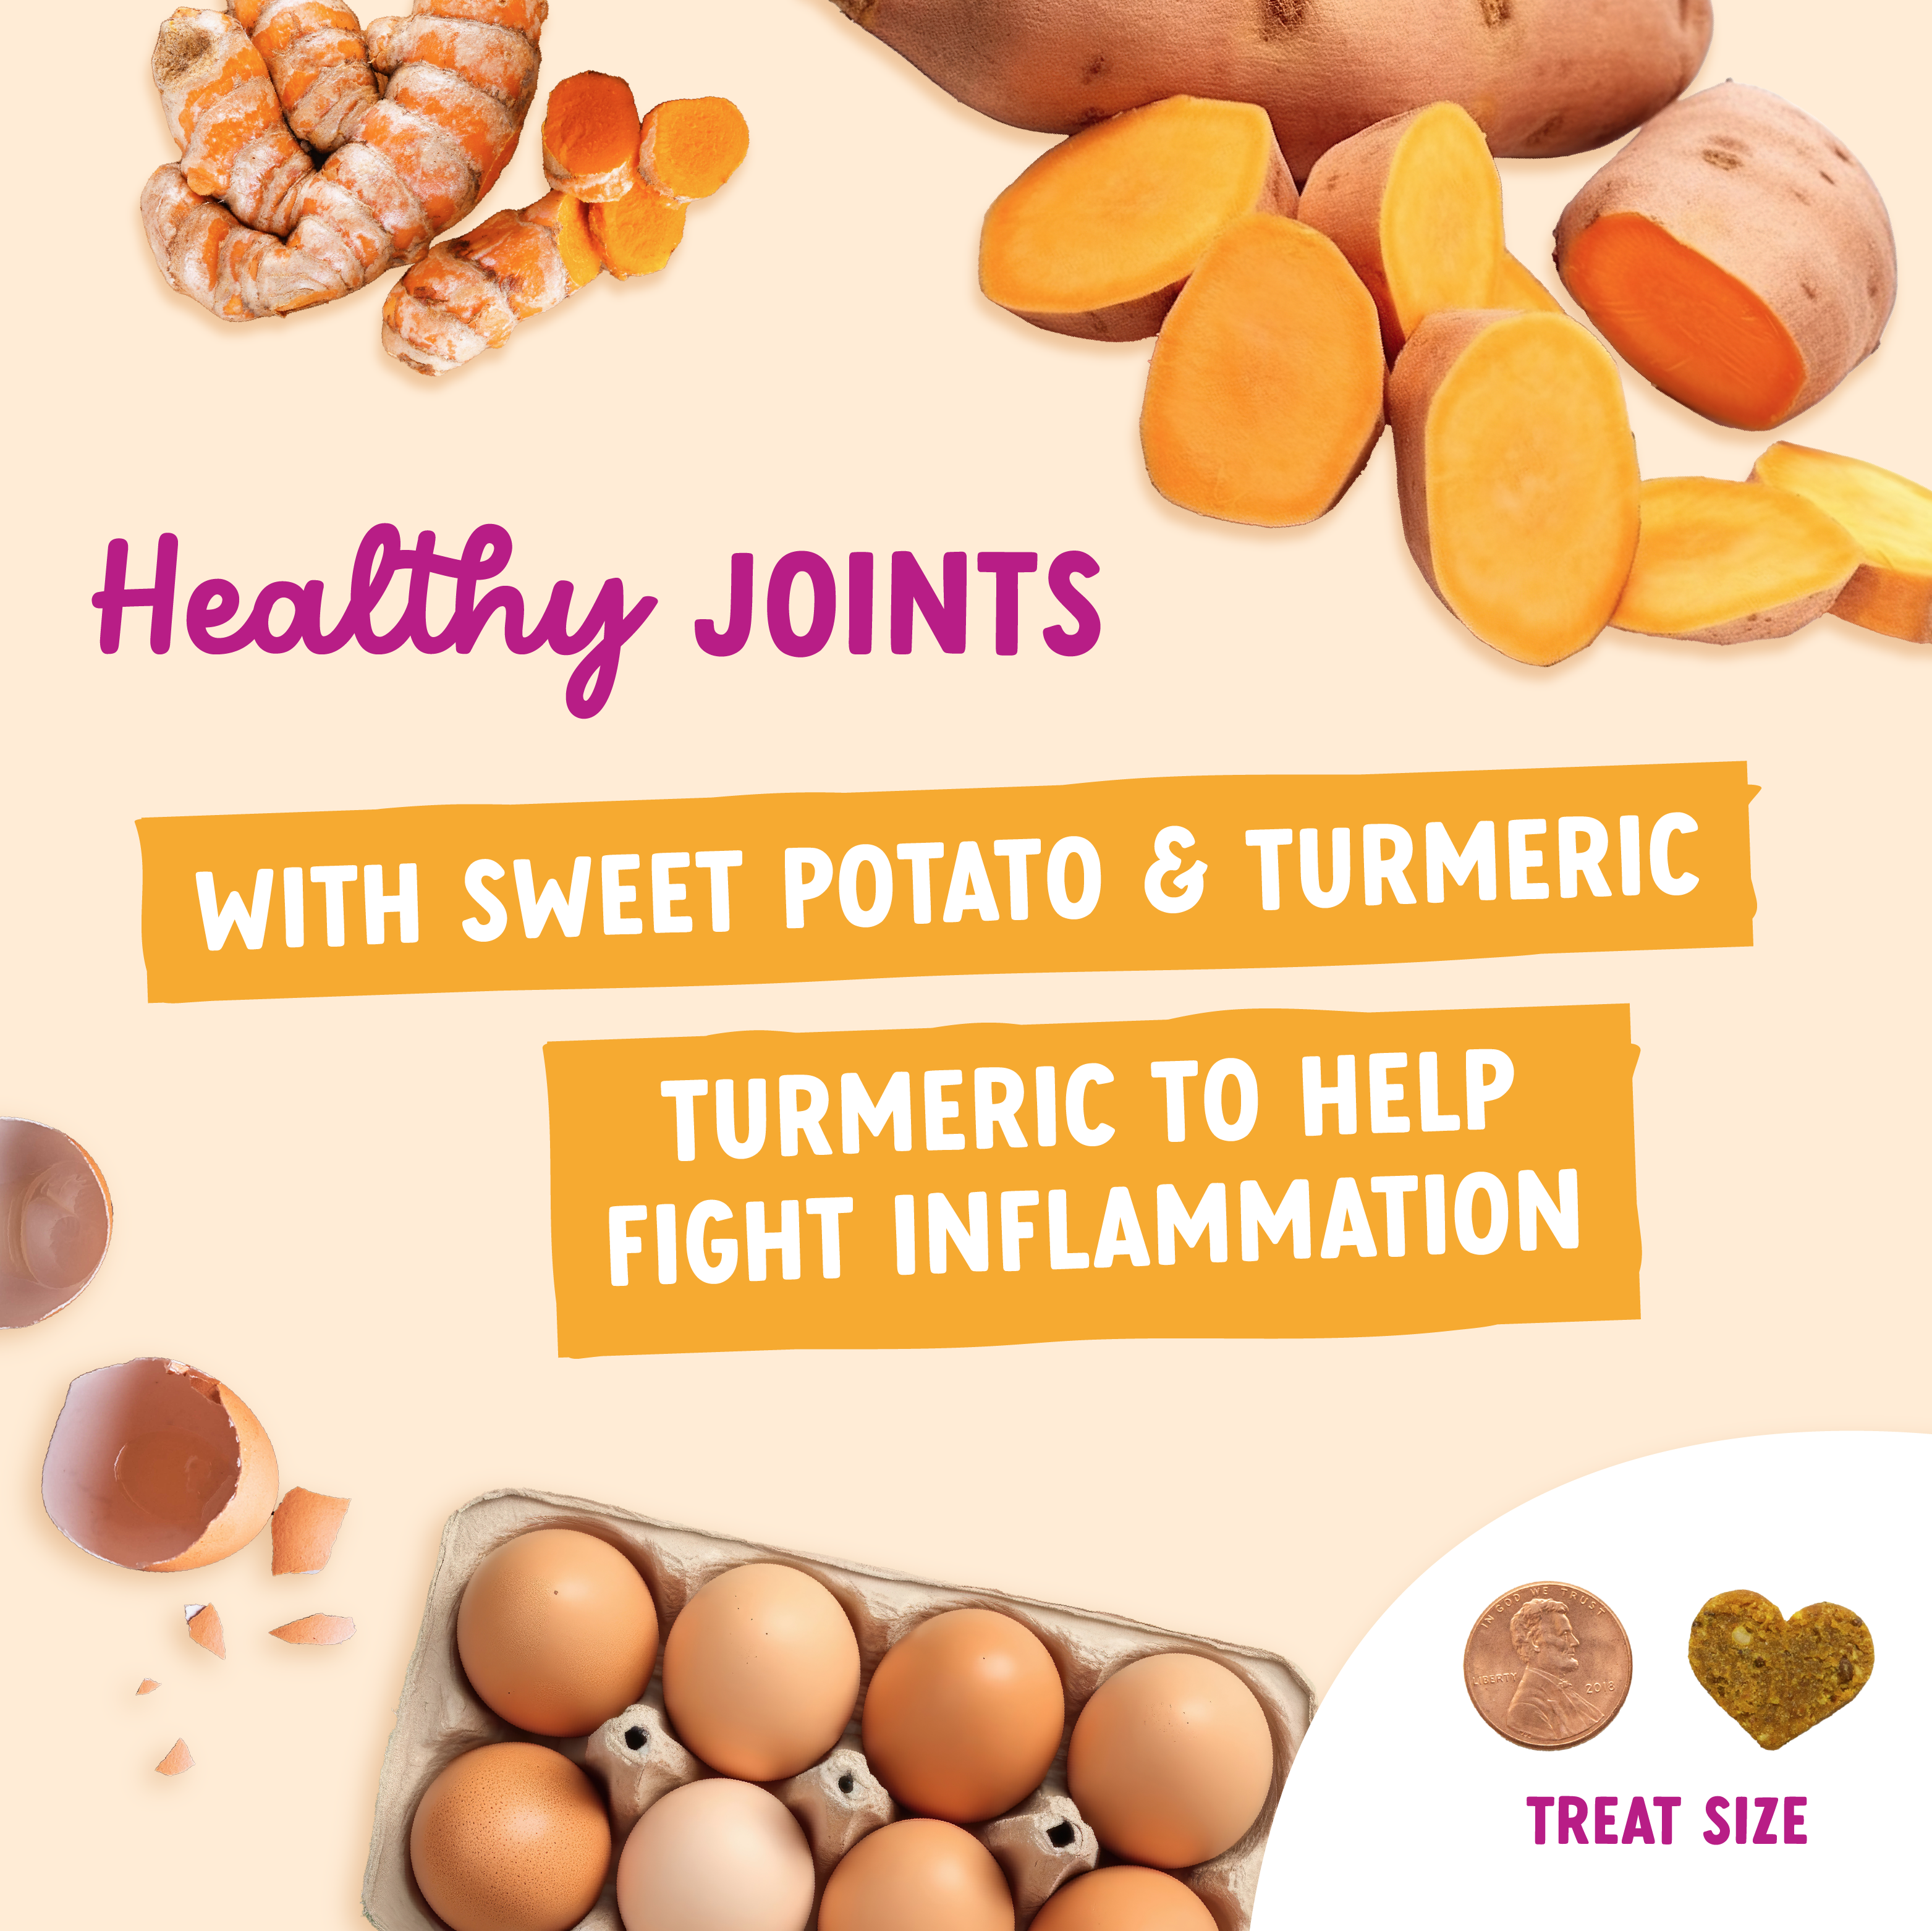 Impawfect Sweet Potato & Turmeric for Hip & Joint Support